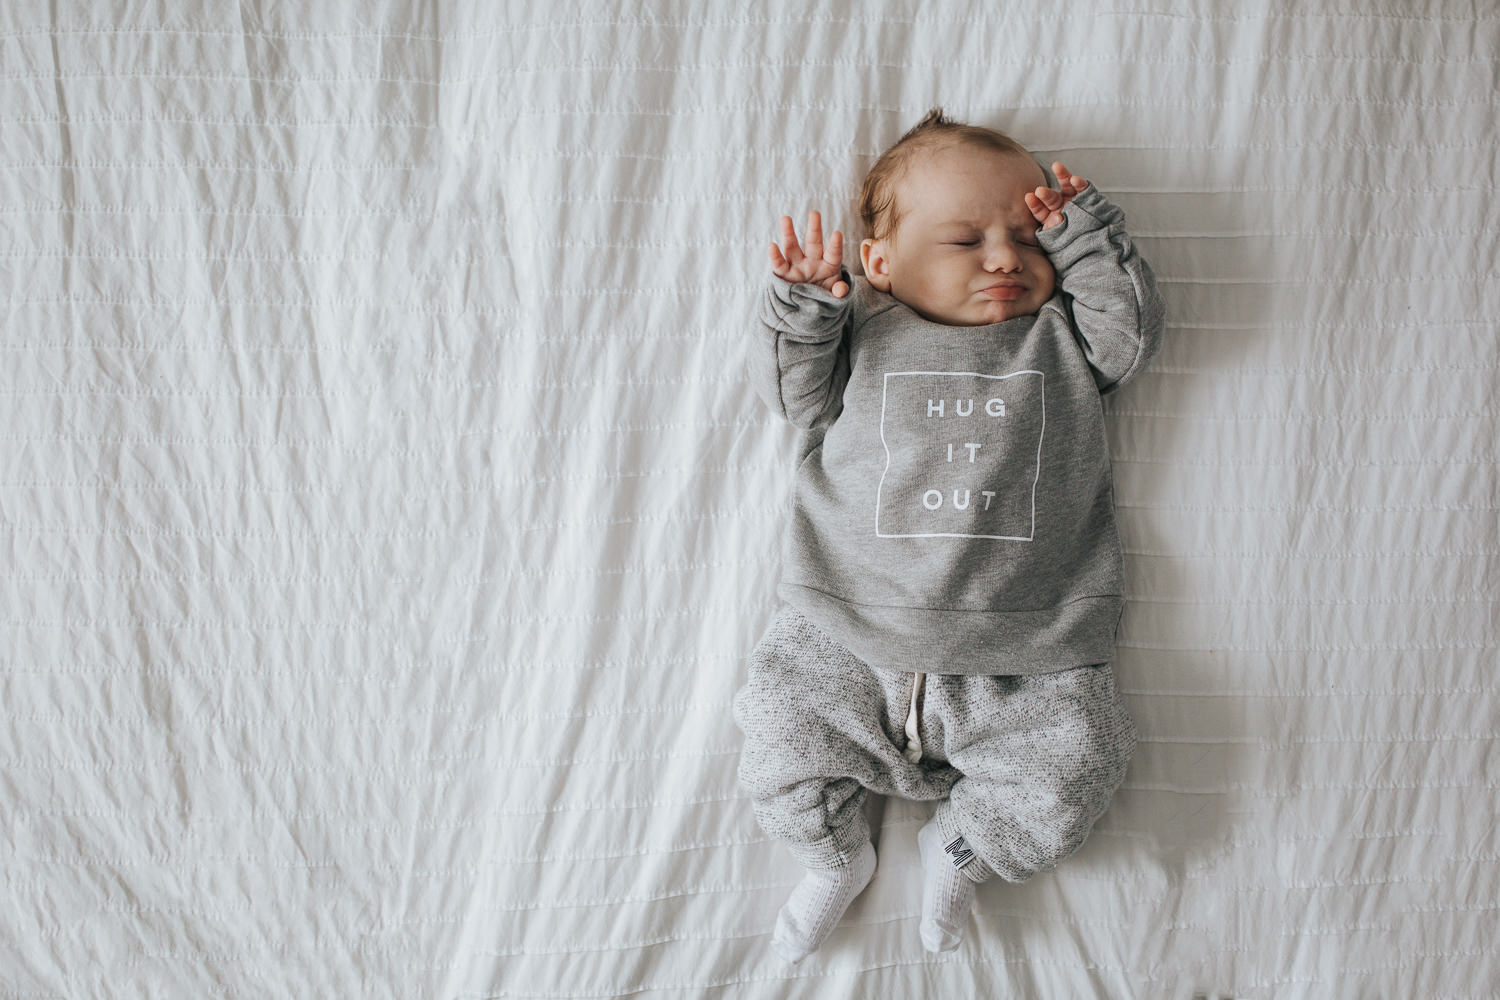 2 month old baby boy rubbing eyes lying on bed - Toronto baby photos